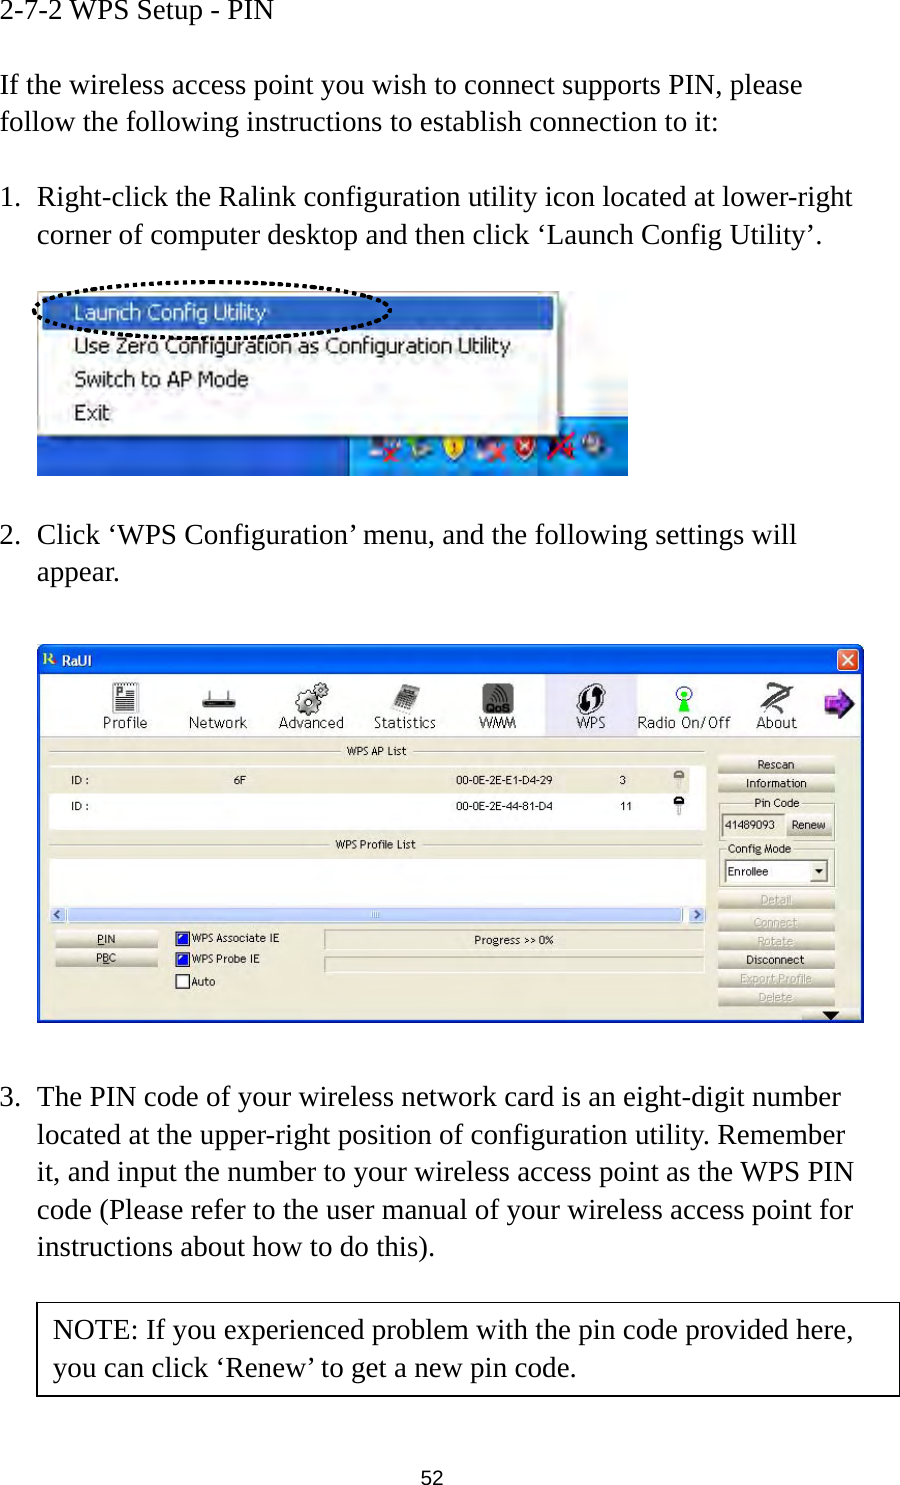  52 2-7-2 WPS Setup - PIN  If the wireless access point you wish to connect supports PIN, please follow the following instructions to establish connection to it:  1. Right-click the Ralink configuration utility icon located at lower-right corner of computer desktop and then click ‘Launch Config Utility’.    2. Click ‘WPS Configuration’ menu, and the following settings will appear.    3. The PIN code of your wireless network card is an eight-digit number located at the upper-right position of configuration utility. Remember it, and input the number to your wireless access point as the WPS PIN code (Please refer to the user manual of your wireless access point for instructions about how to do this).     NOTE: If you experienced problem with the pin code provided here, you can click ‘Renew’ to get a new pin code. 